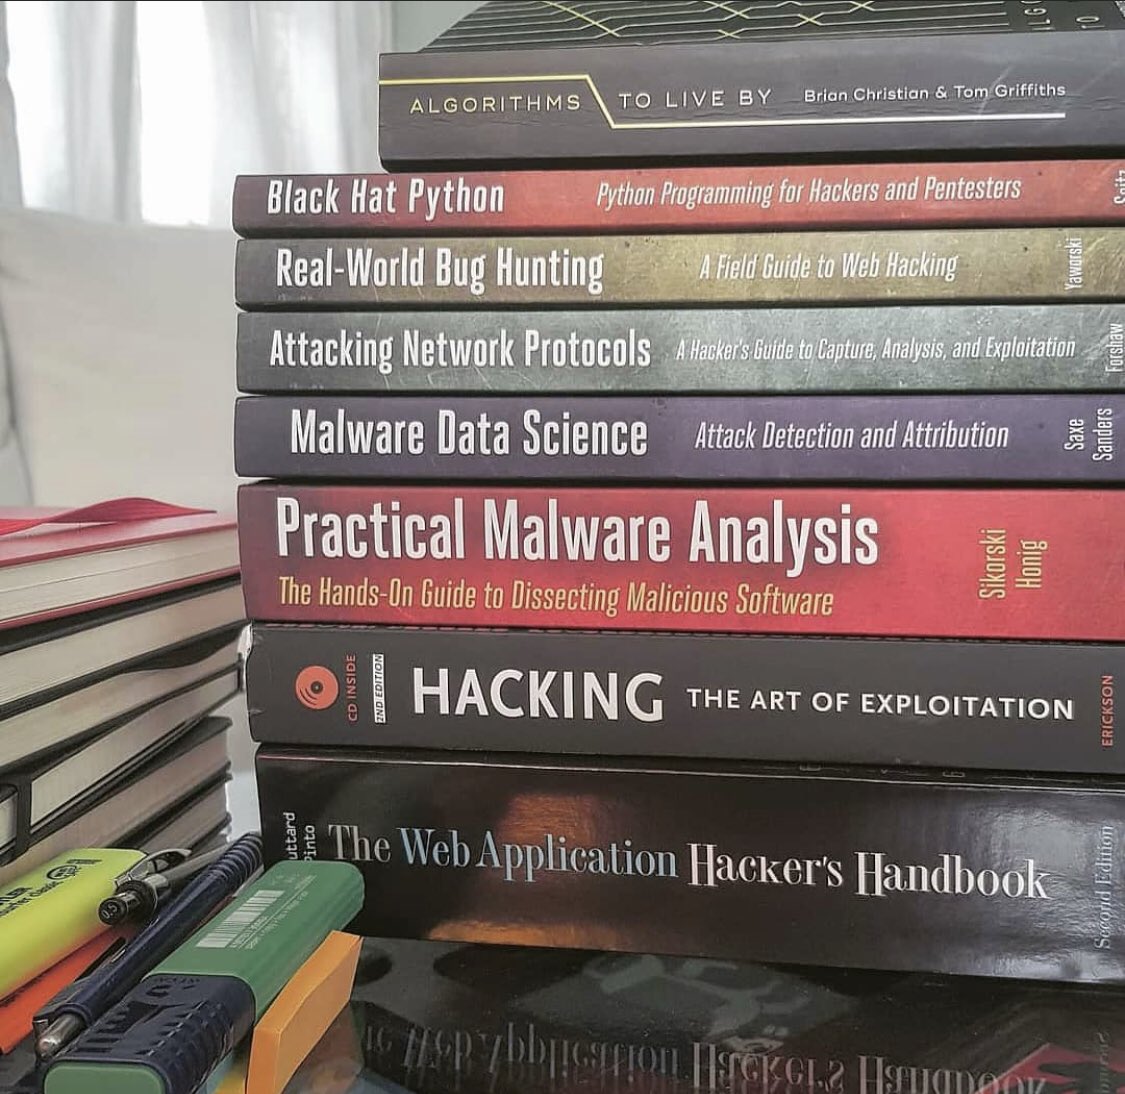 Top 20 FREE Hacking Books (Online)
👇